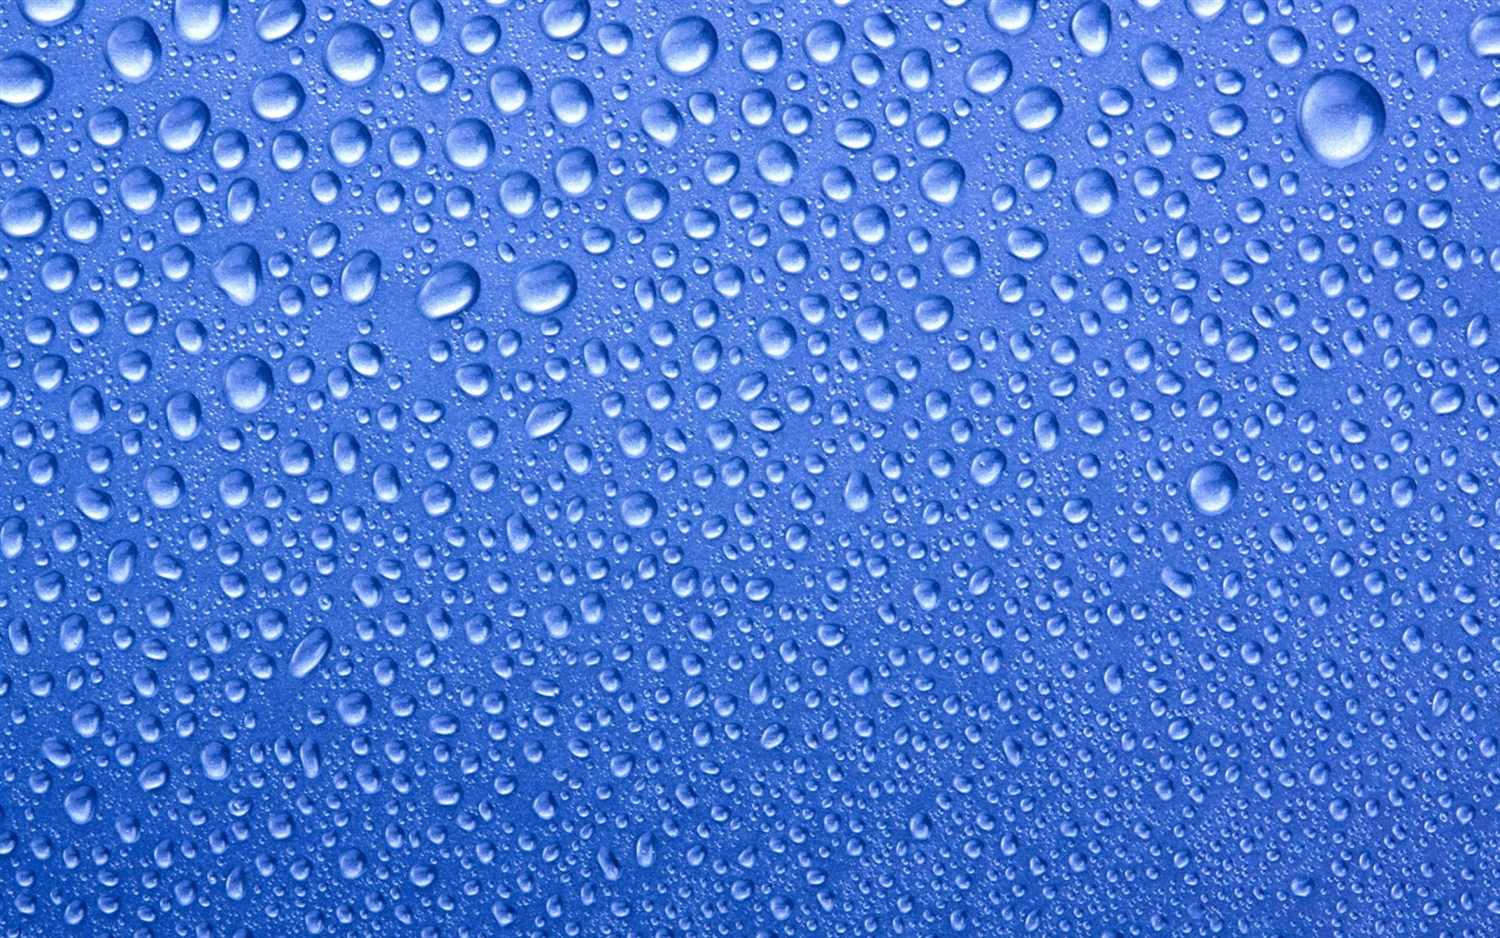 Image showing water droplets on glass after nanotechnology self-cleaning glass application